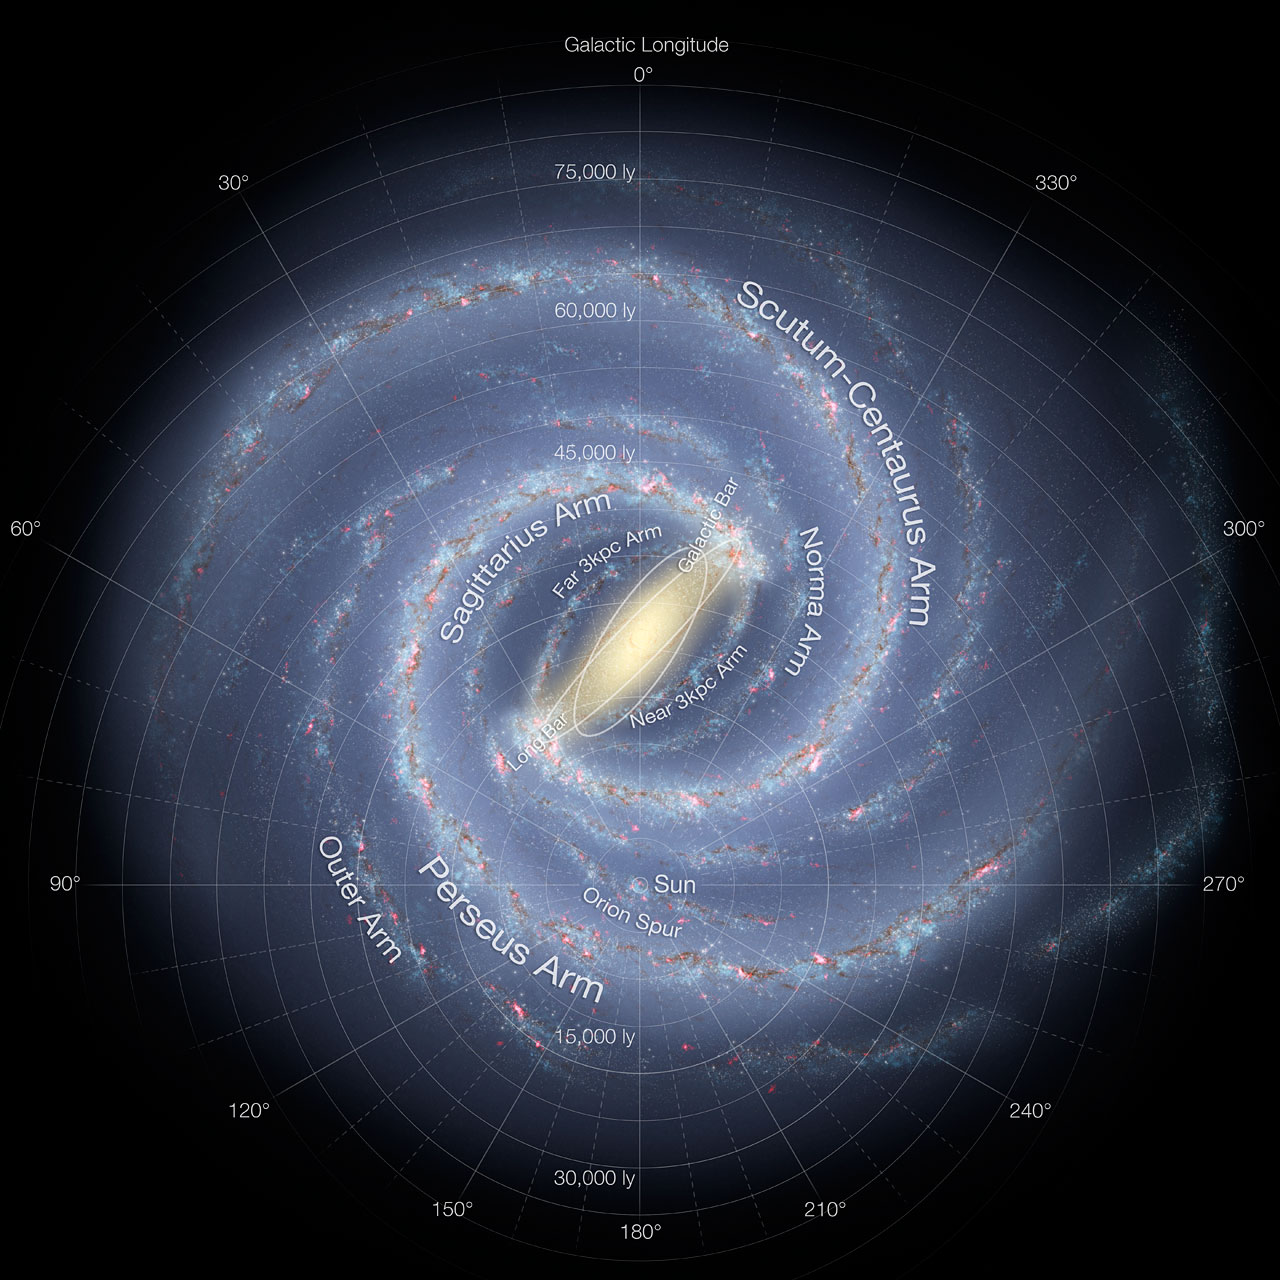 Our home galaxy is the Milky Way.